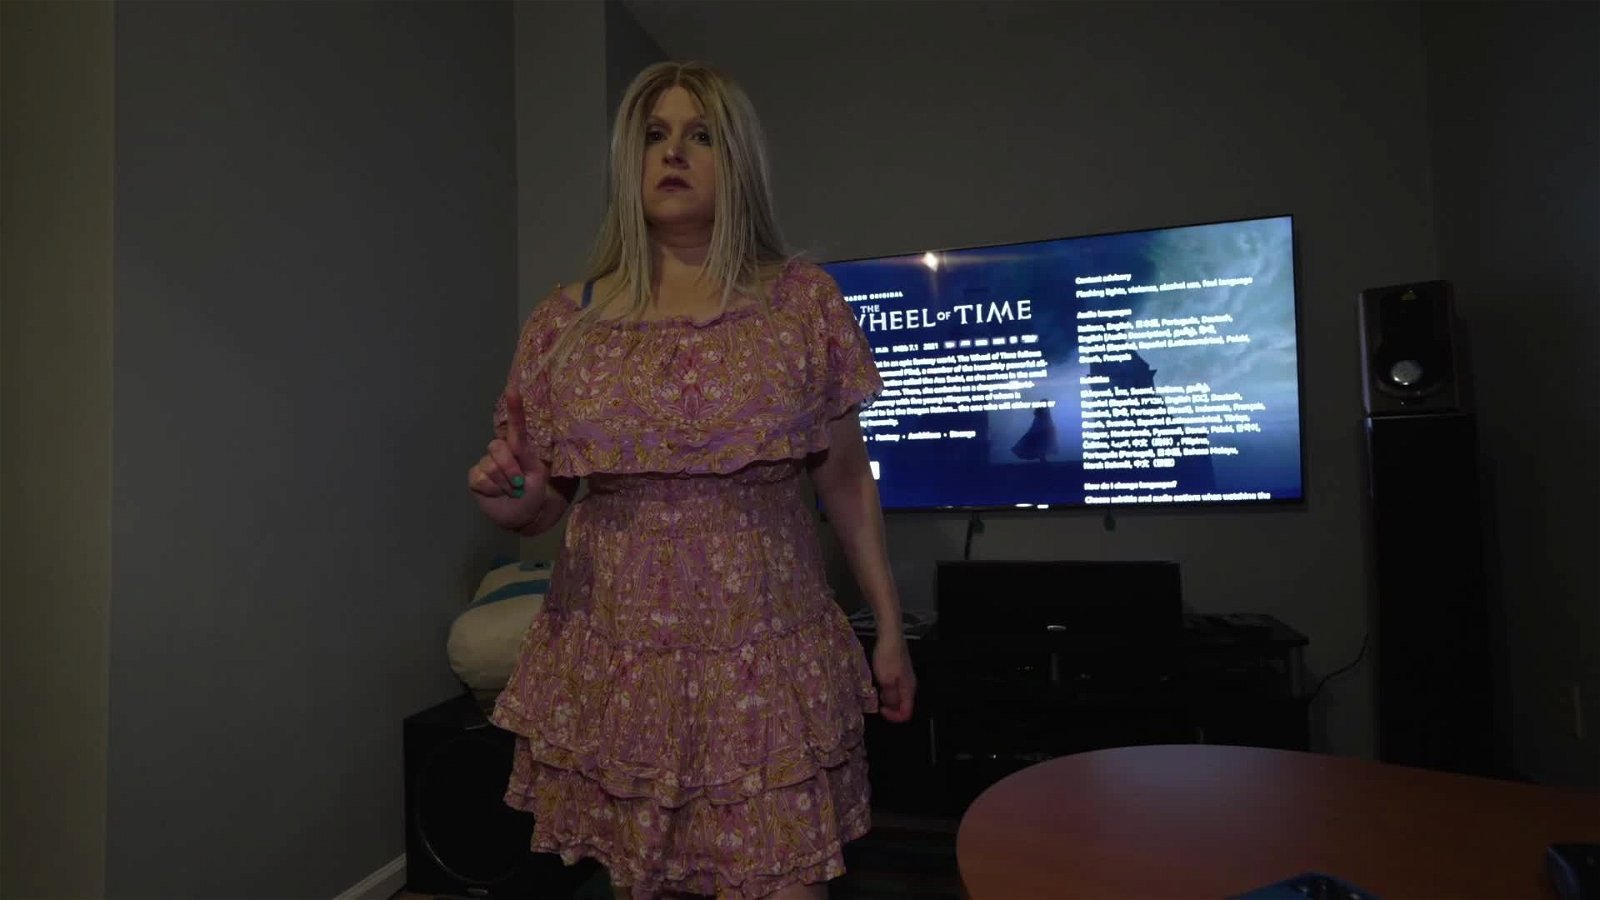 Video by tabithaxxx with the username @tabithaxxx, who is a star user,  April 23, 2023 at 7:10 PM. The post is about the topic MILF and the text says 'New Video Drop - SEX WITH FEMBOT CHERRY 6000 - You can find it at my Clip Stores - https://allmylinks.com/tabithaxxx #milf #fembot #robot #pov #amateur #amateurs #bigtits #bigboobs #ass #bigass #lingerie #busty #mature #cougar #roleplay..'